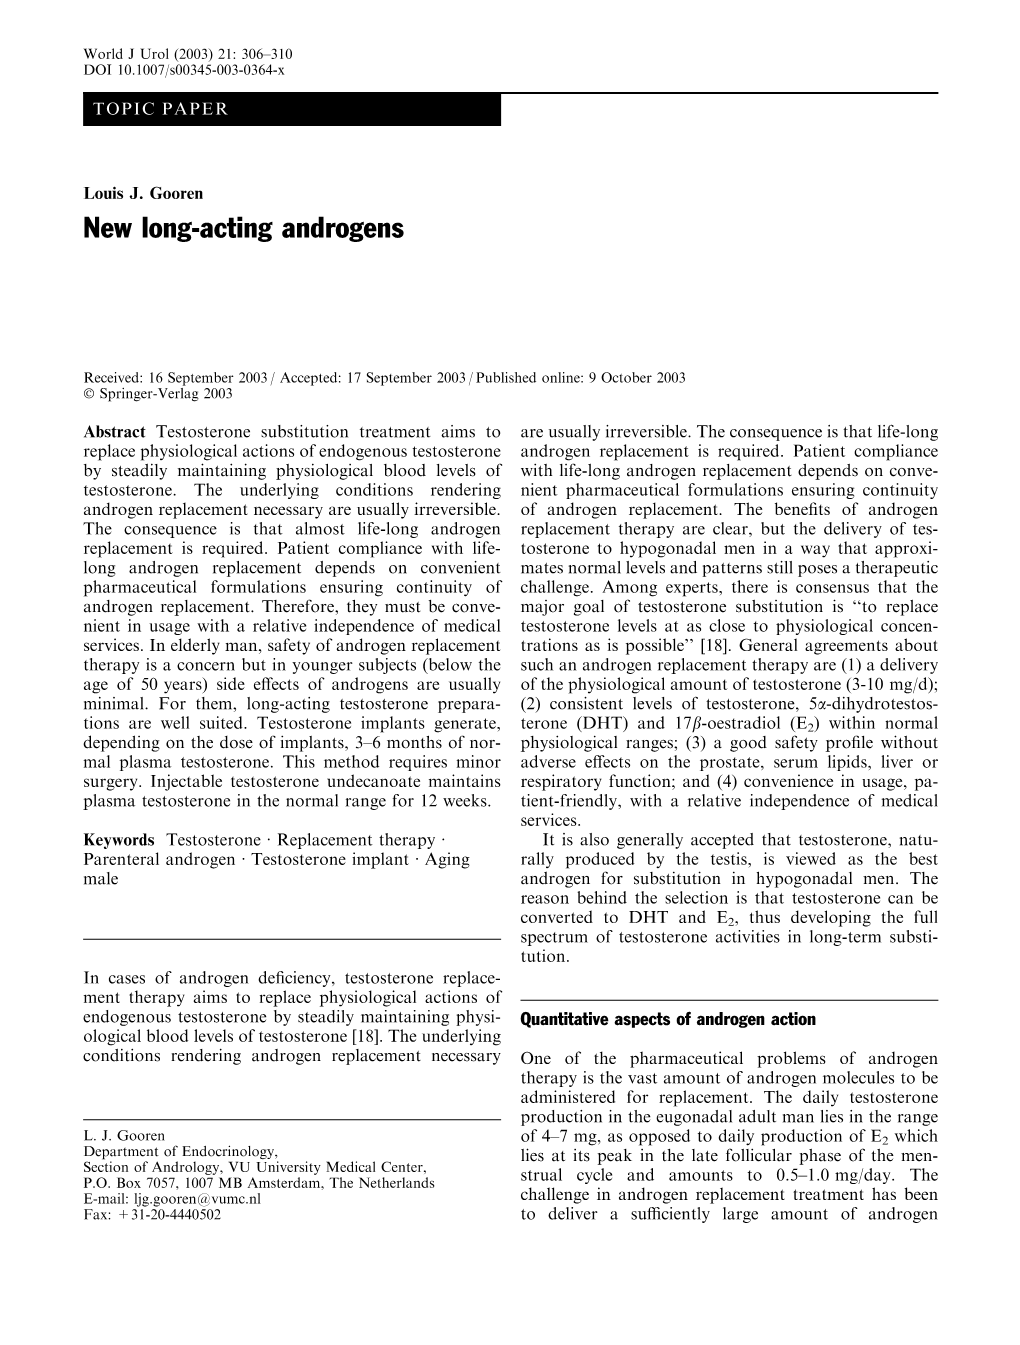 New Long-Acting Androgens